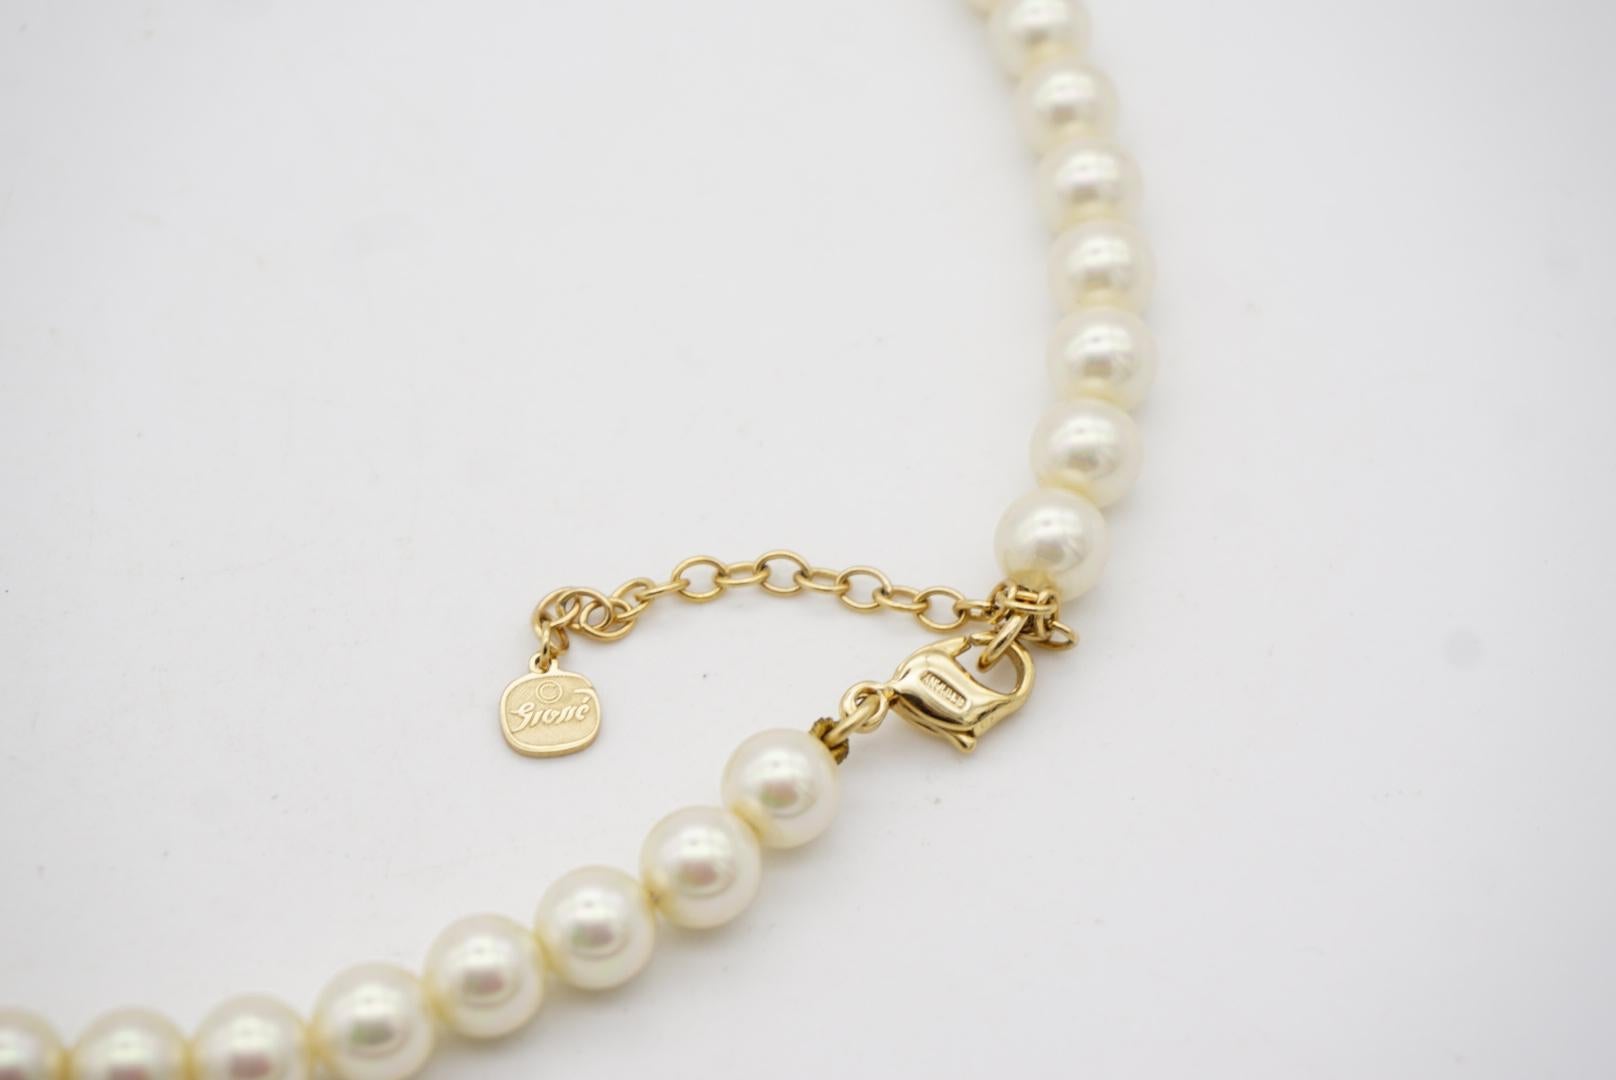 Christian Dior GROSSE 1960s White Pearls Water Drop Pendant Crystals Necklace For Sale 8